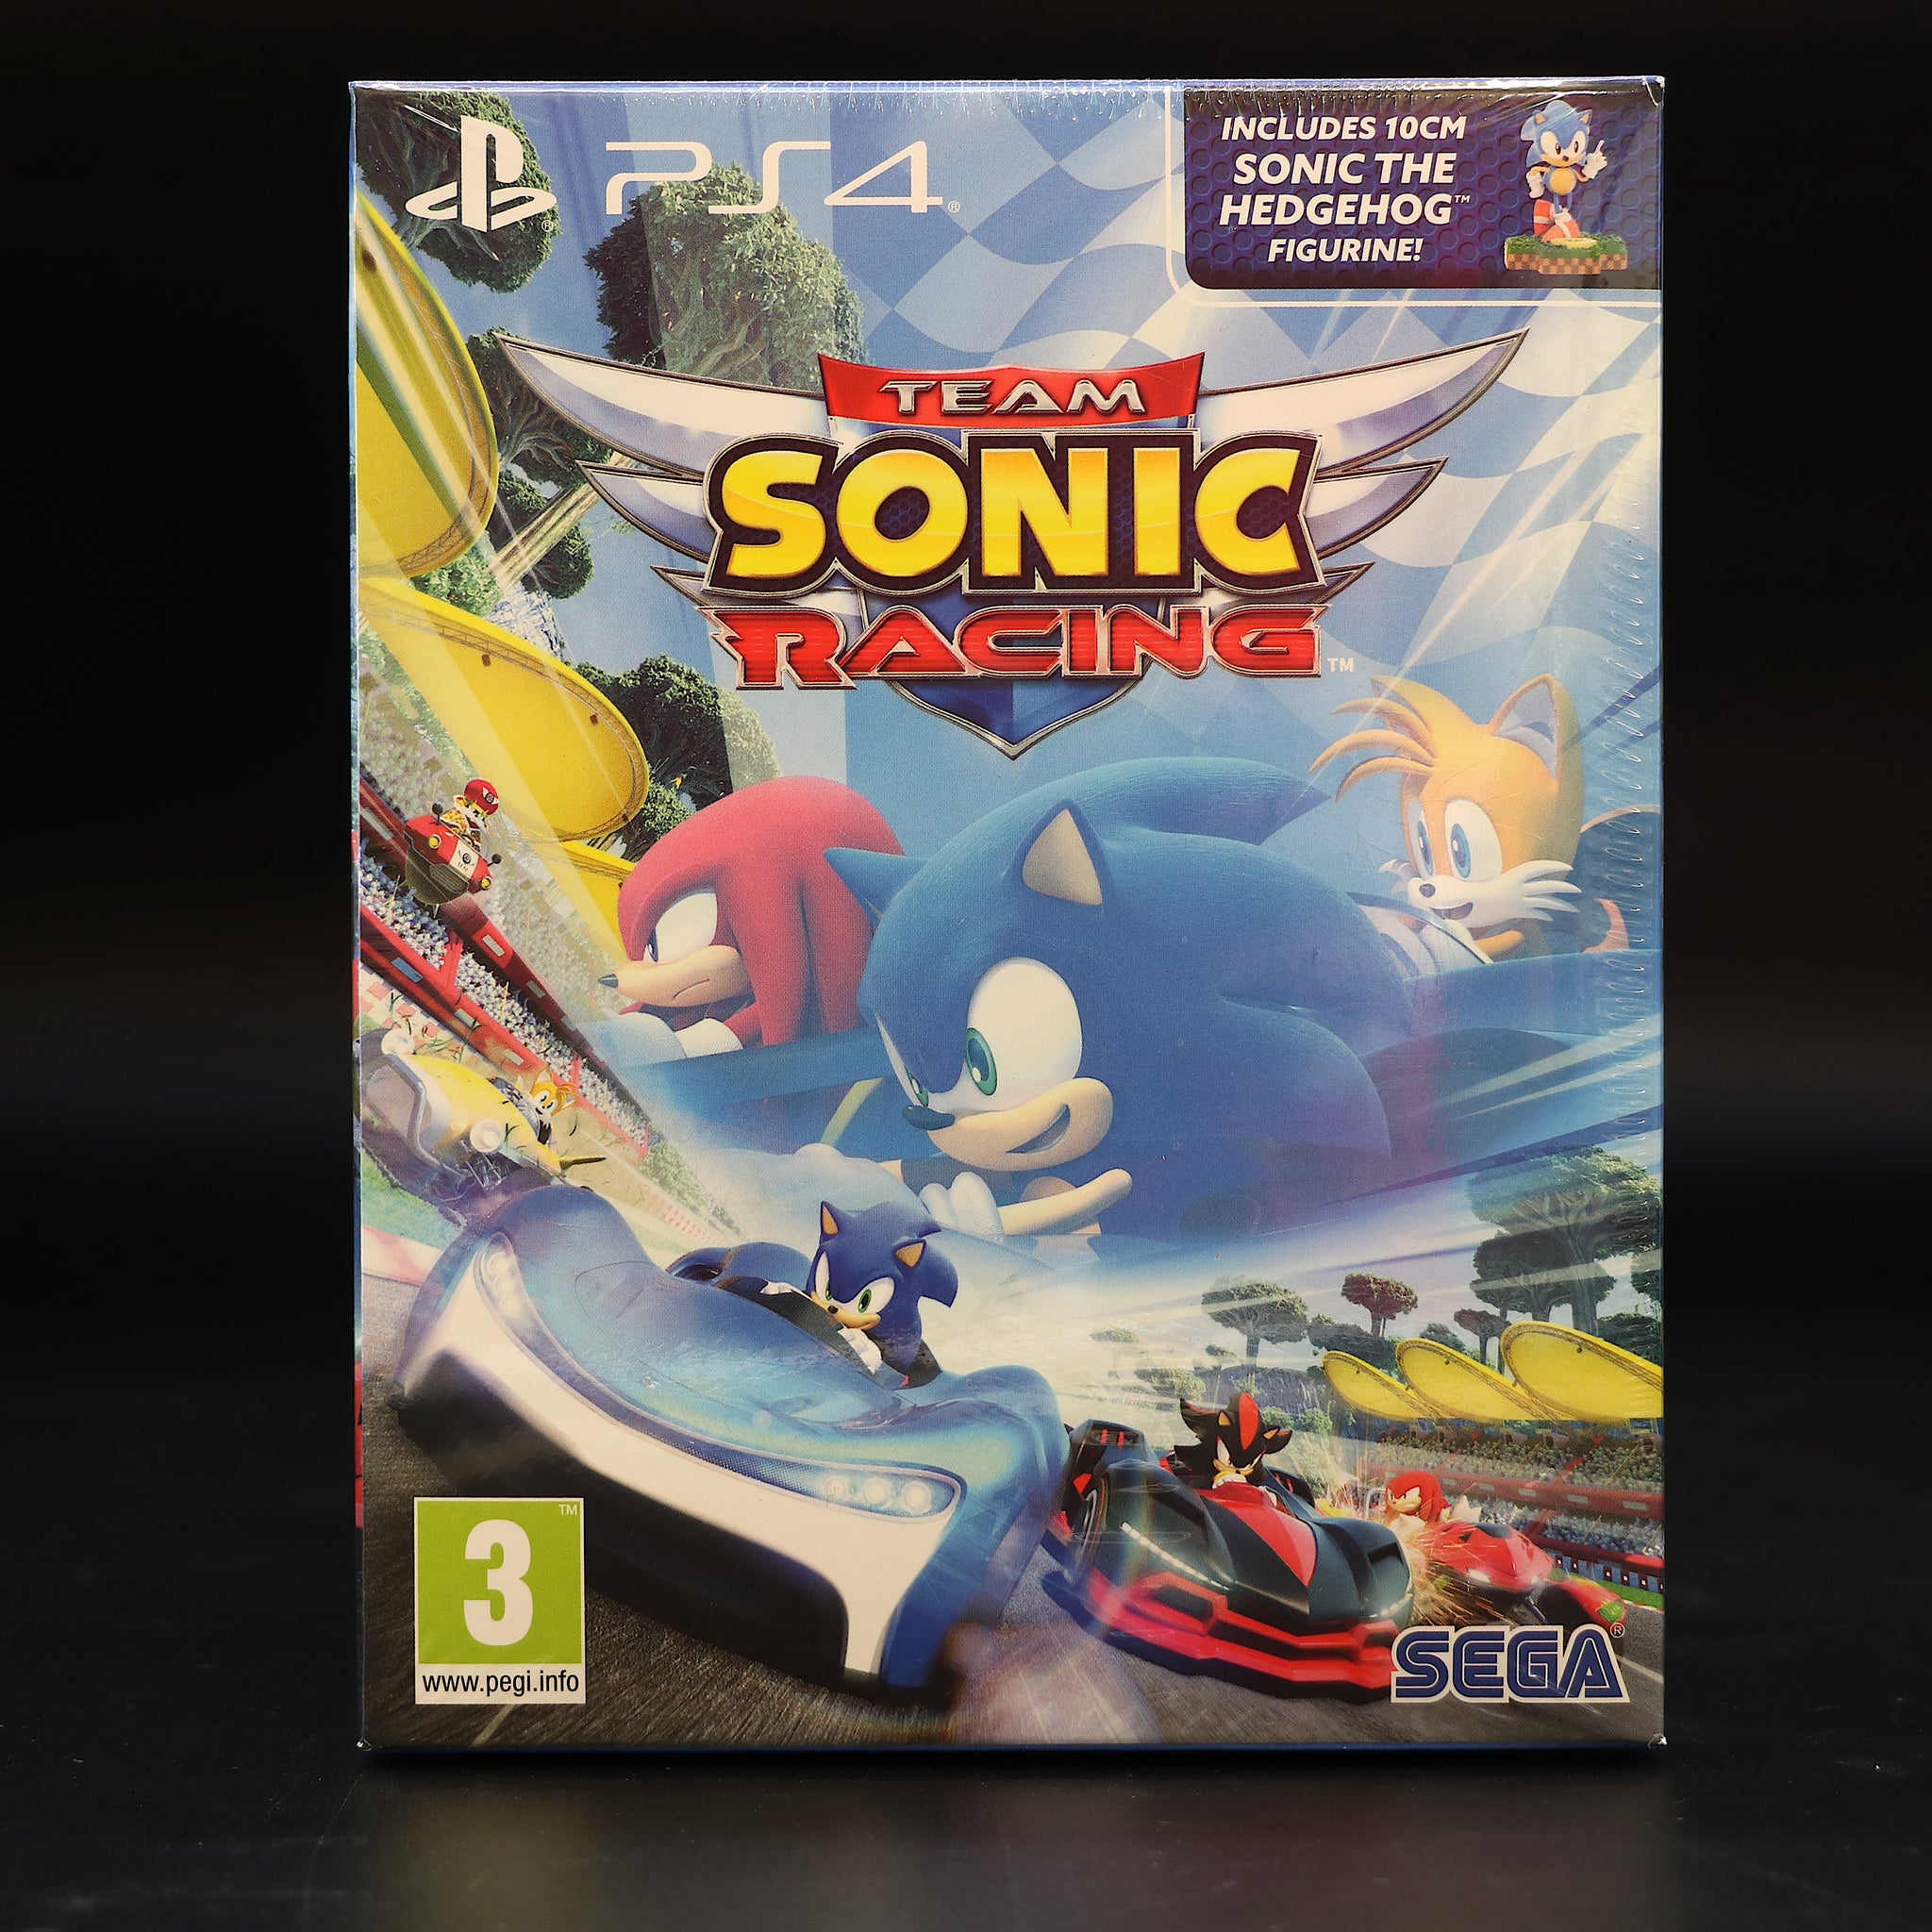 Team Sonic Racing (The Hedgehog) | Special Edition With Figure | Sony PS4 Game